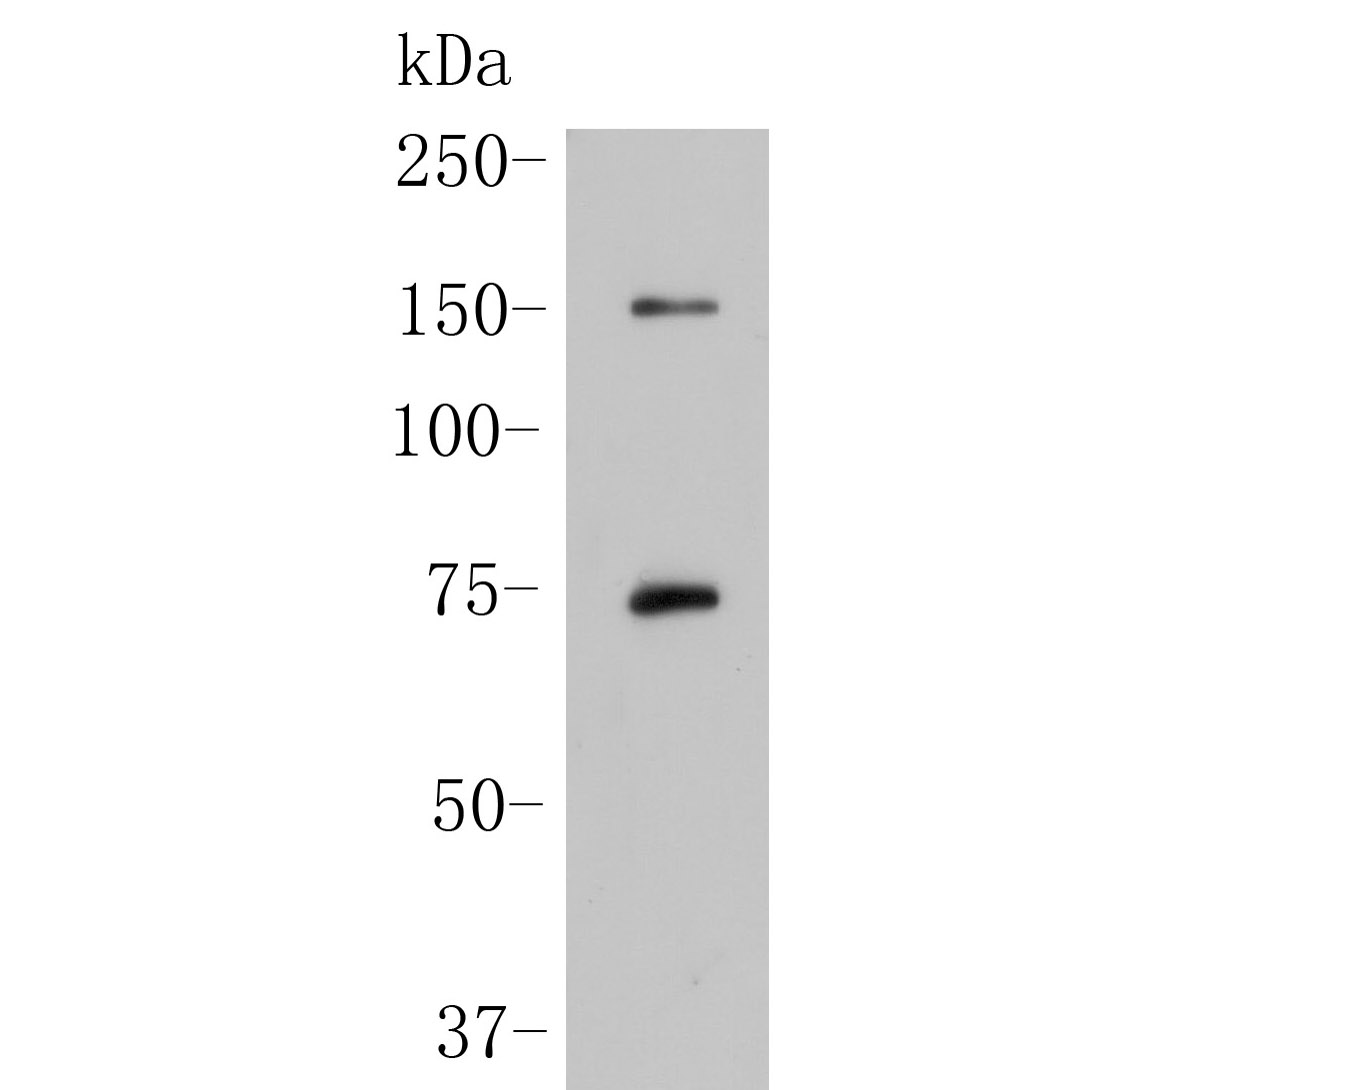 Western blot analysis of SPATA13 on rat kidney tissue lysate. Proteins were transferred to a PVDF membrane and blocked with 5% BSA in PBS for 1 hour at room temperature. The primary antibody (ER1902-32, 1/500) was used in 5% BSA at room temperature for 2 hours. Goat Anti-Rabbit IgG - HRP Secondary Antibody (HA1001) at 1:5,000 dilution was used for 1 hour at room temperature.